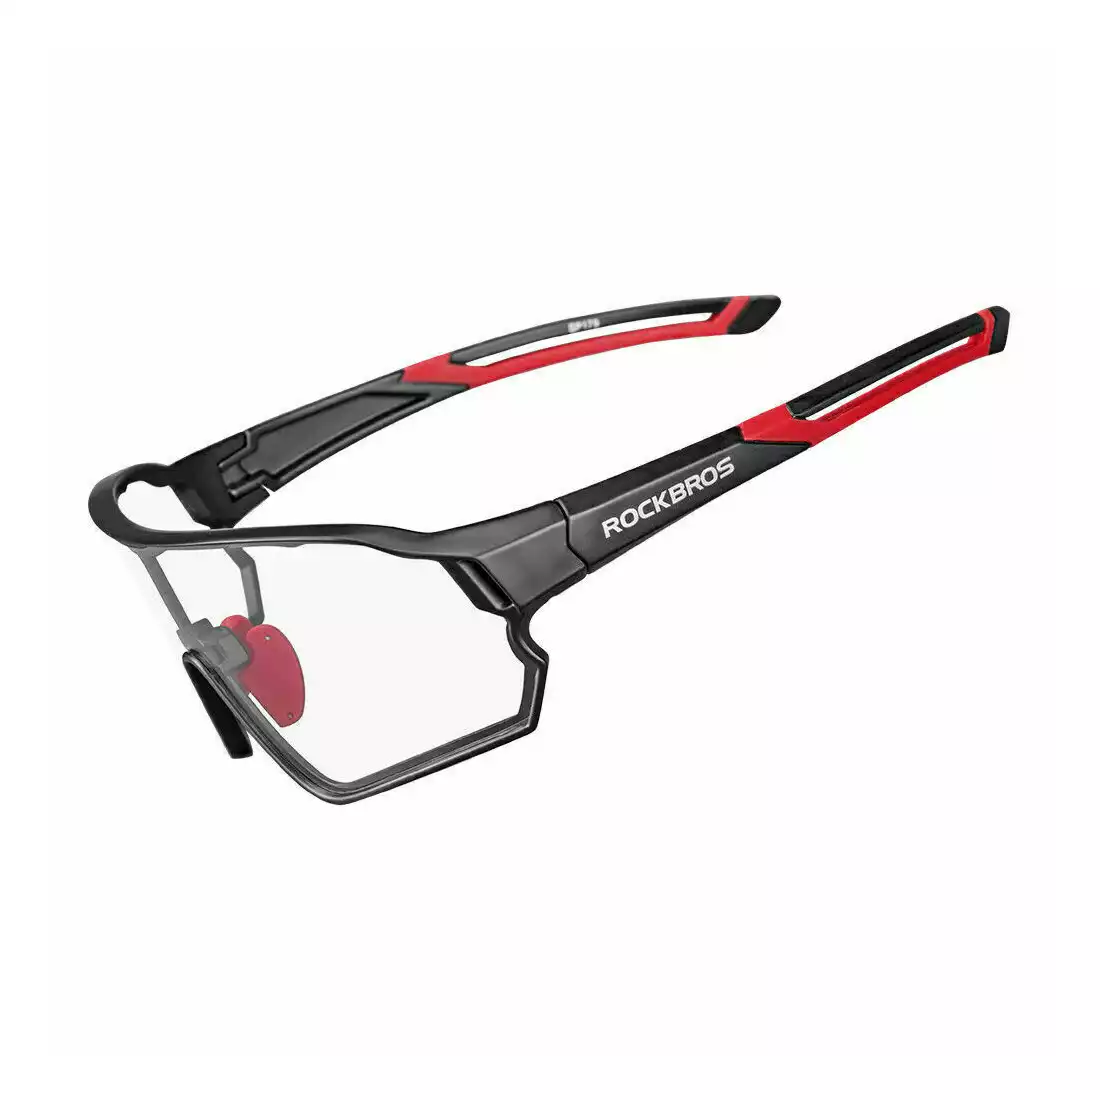 Rockbros 10135 bicycle / sports glasses with photochrome black